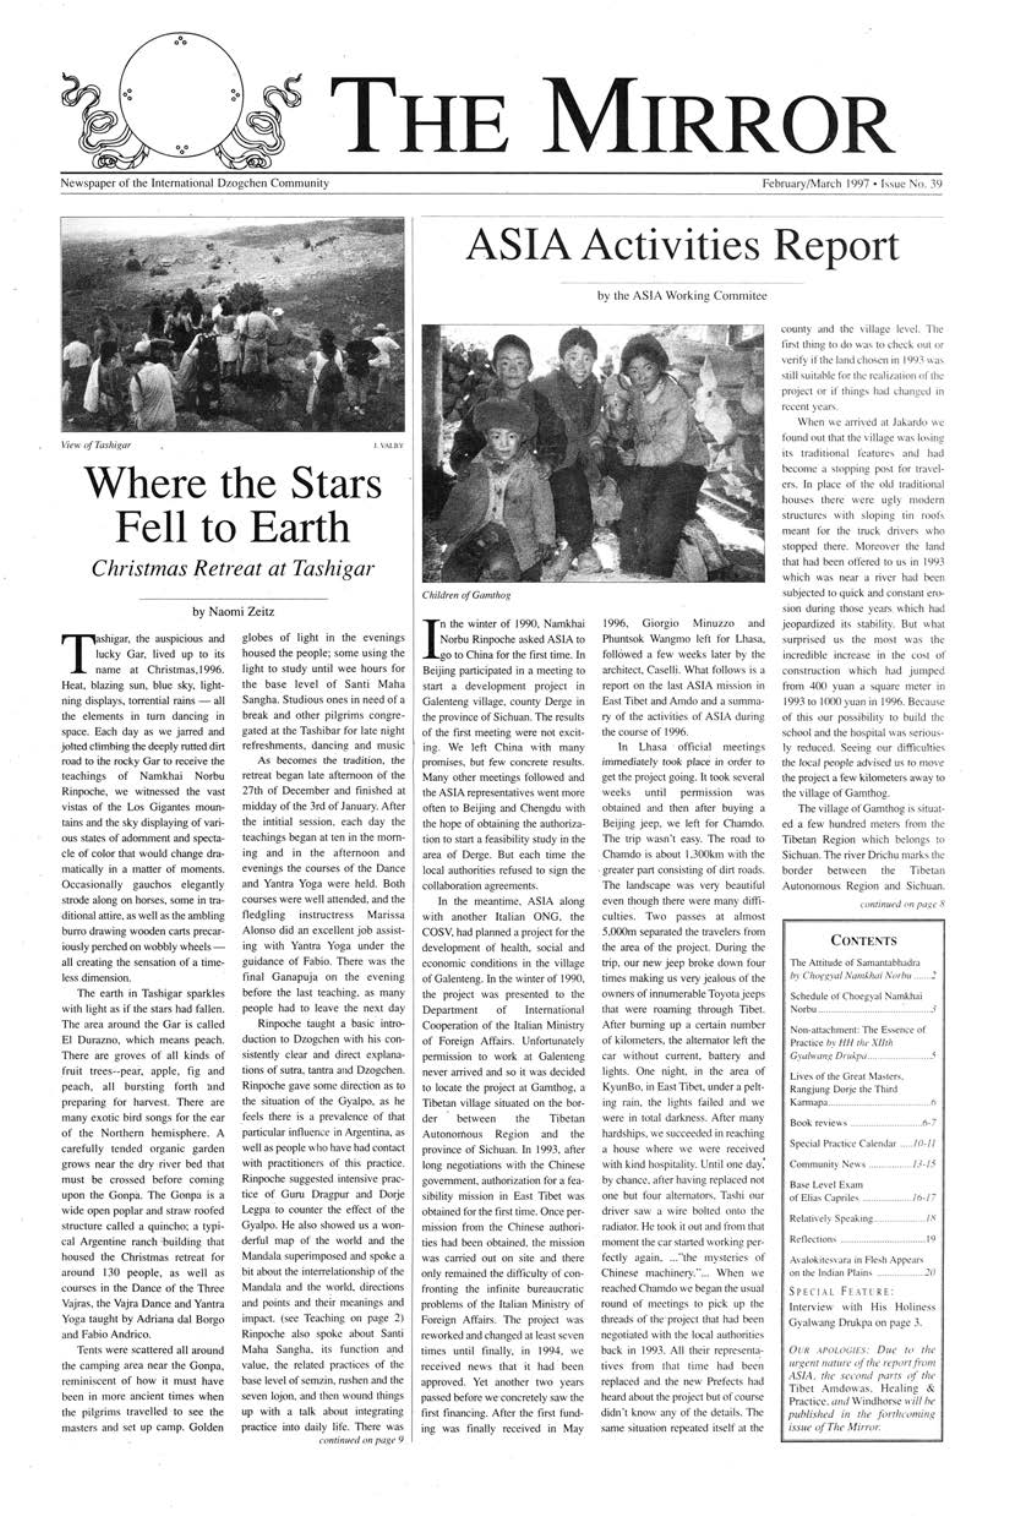 Where the Stars Fell to Earth ASIA Activities Report